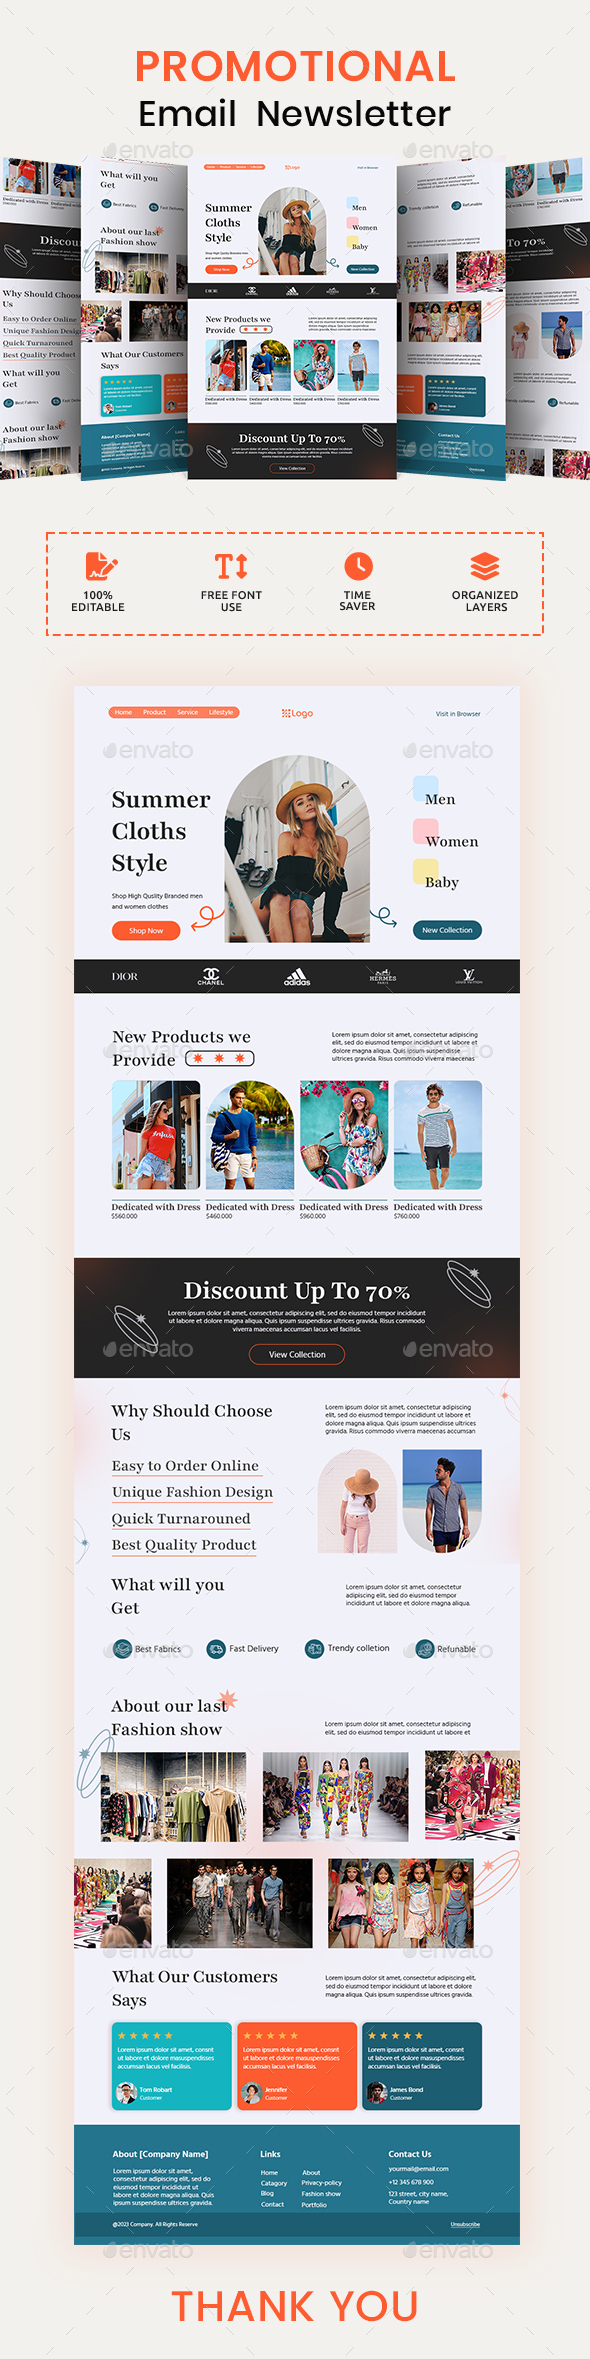 Summer Clothes Email Newsletter PSD Template